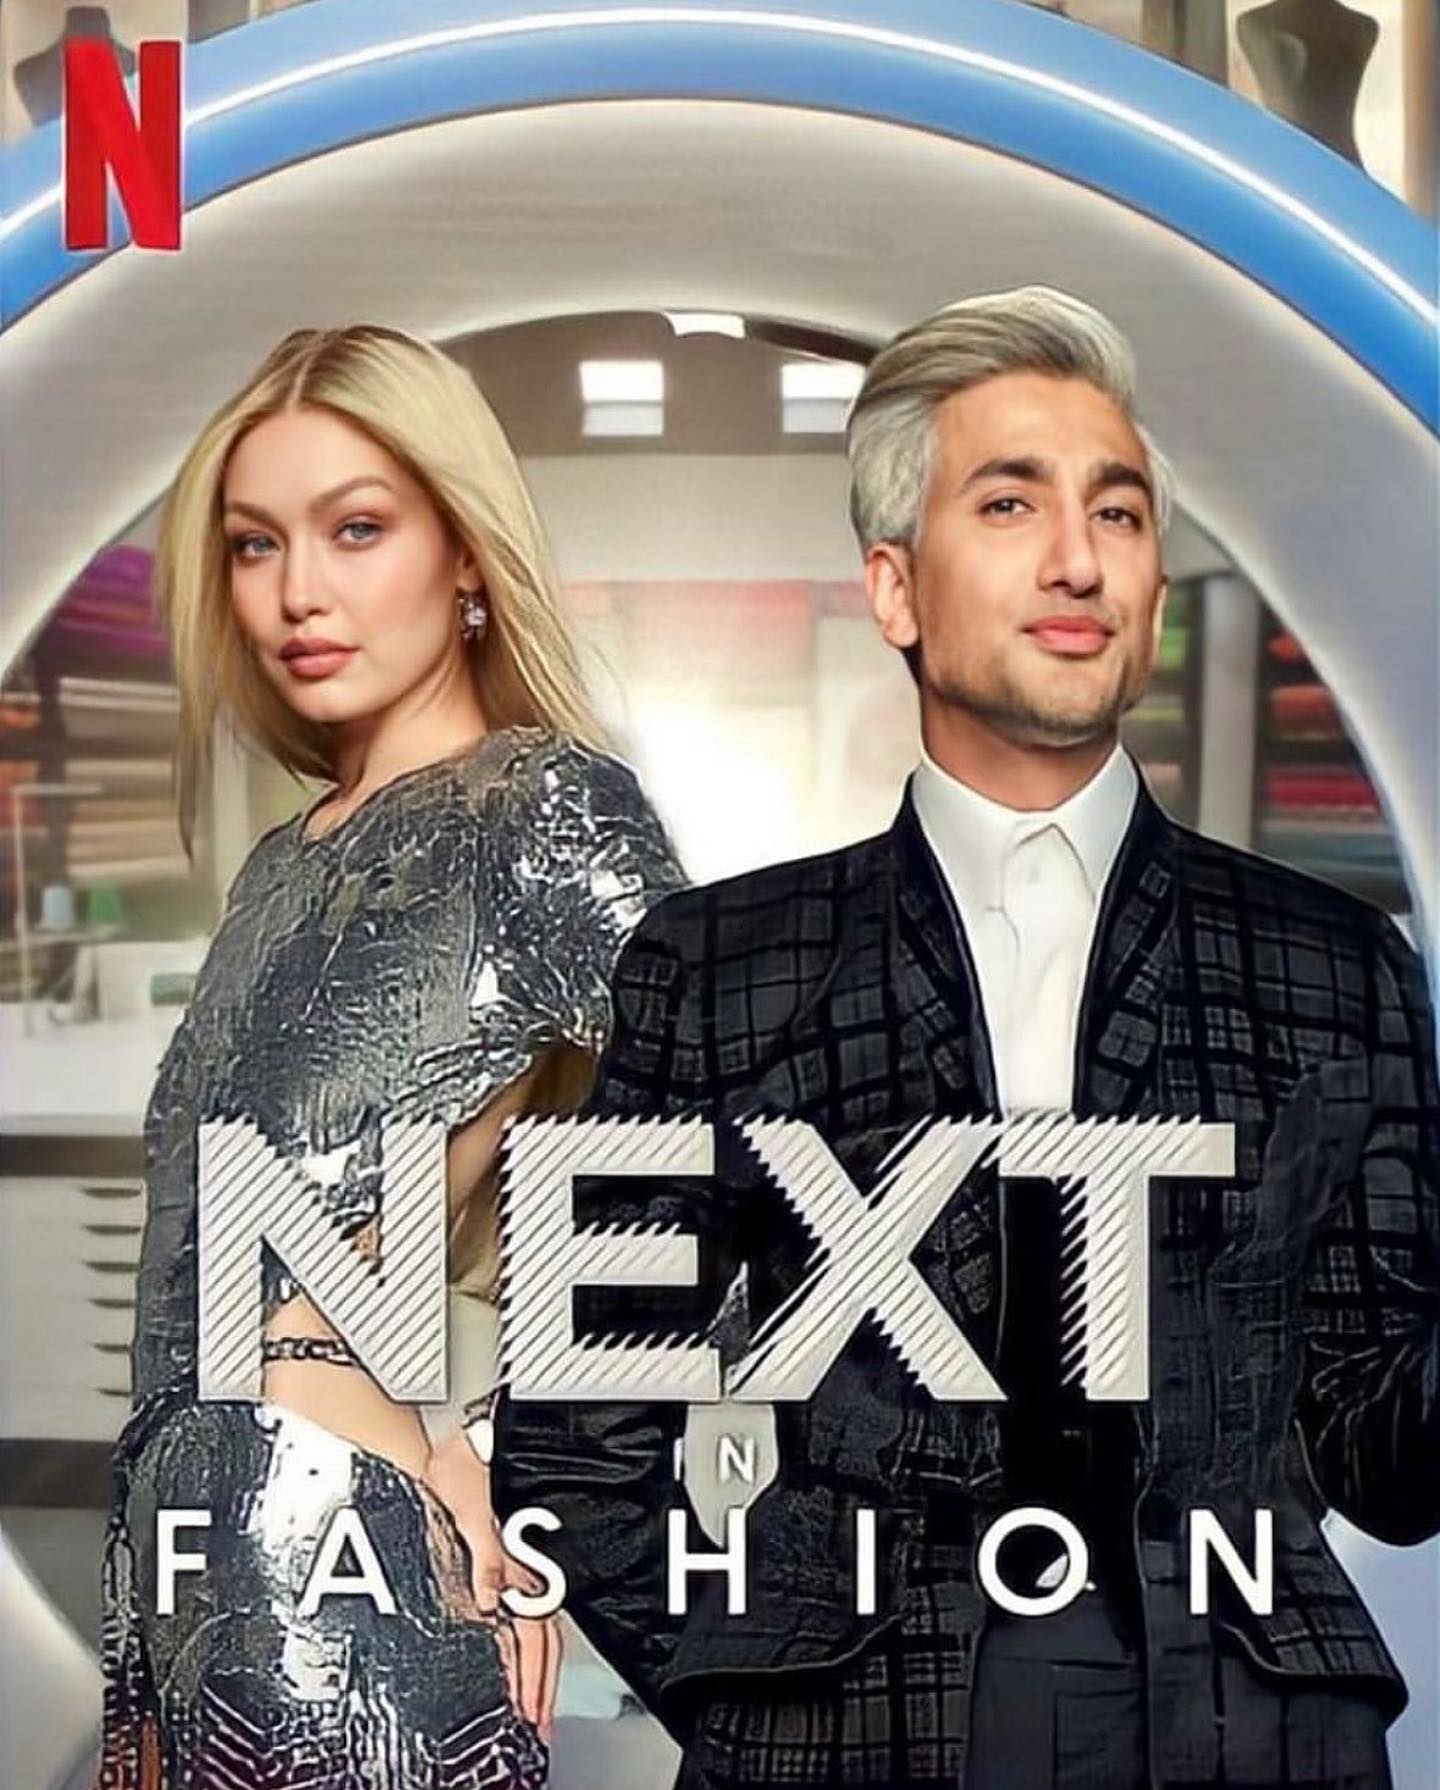 If you’re an Emmy Voter and enjoyed @nextinfashion as much as we did making it, we would LOVE your vote in the Competition Category and Host Category, SO much. Voting ends in a week. Let’s get NIF to the Emmy’s. ????*Link in Tan’s bio